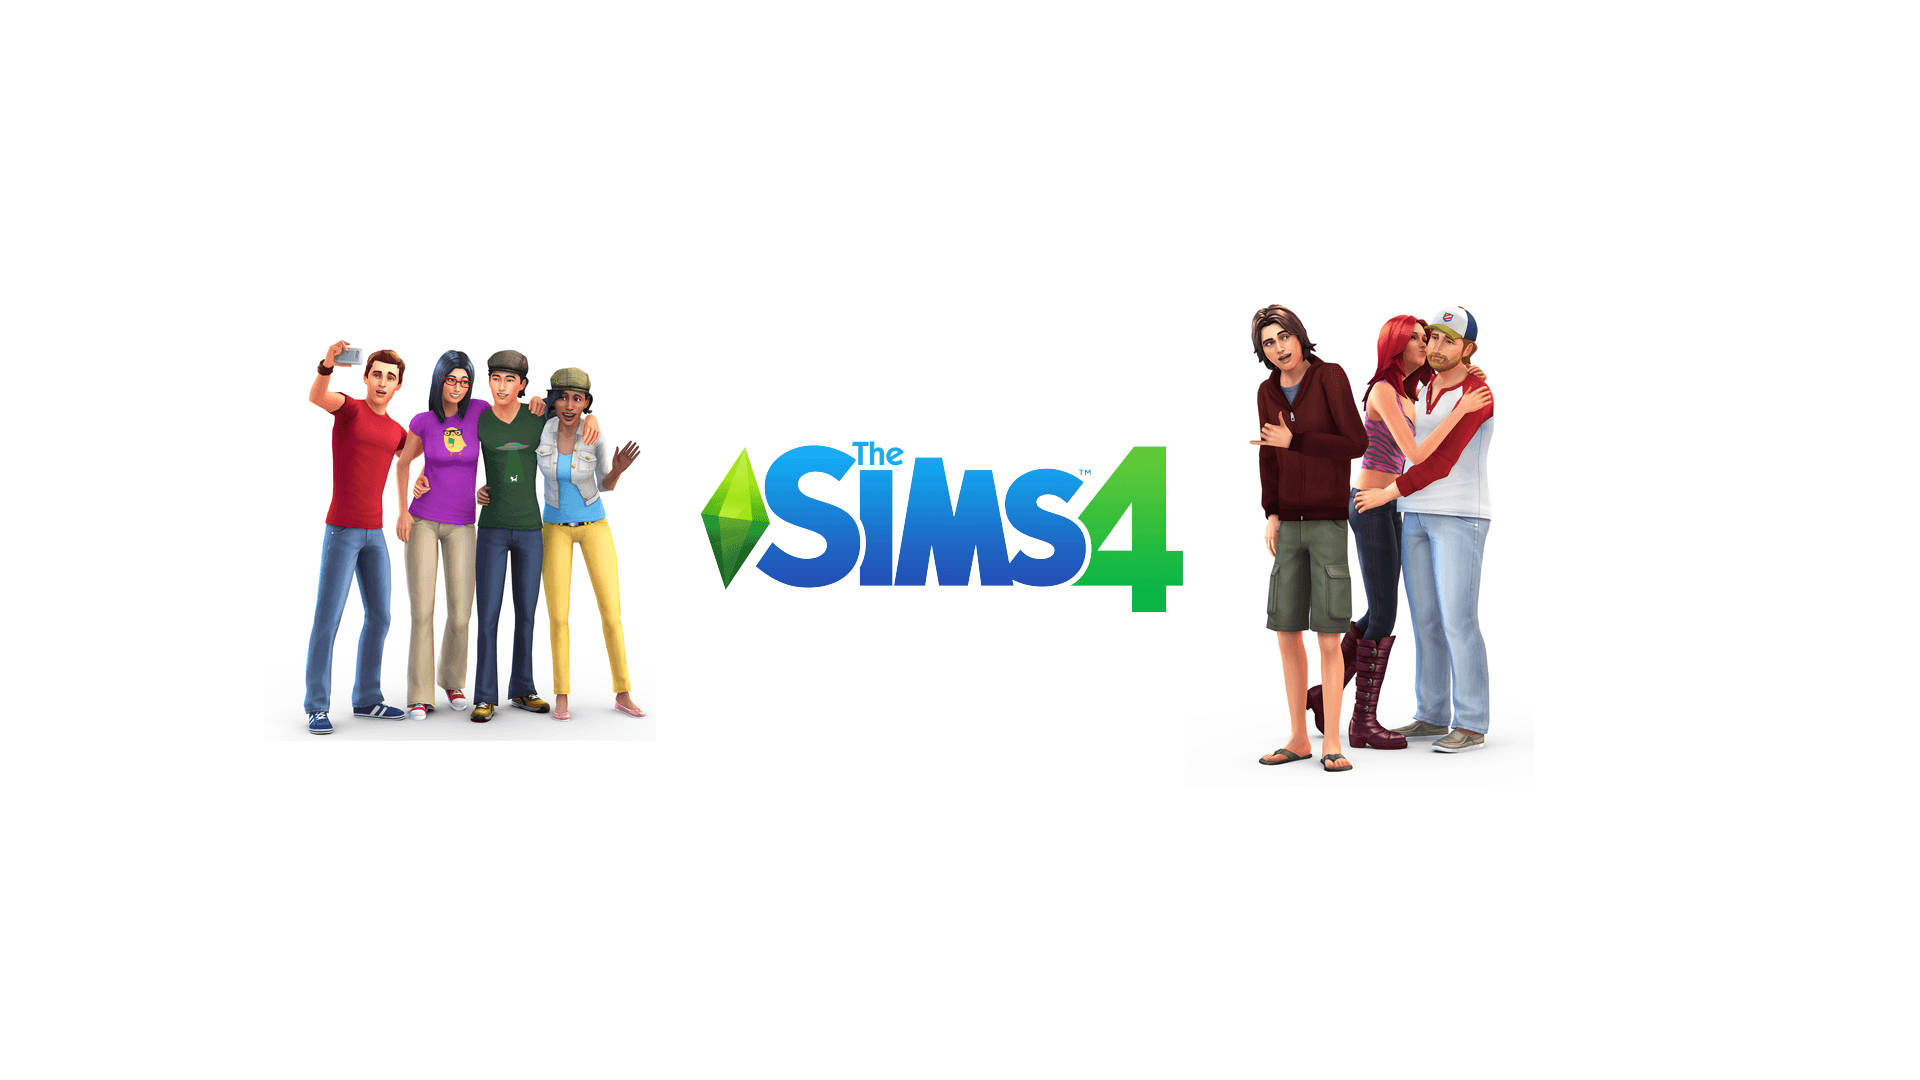 The Sims Characters Poster